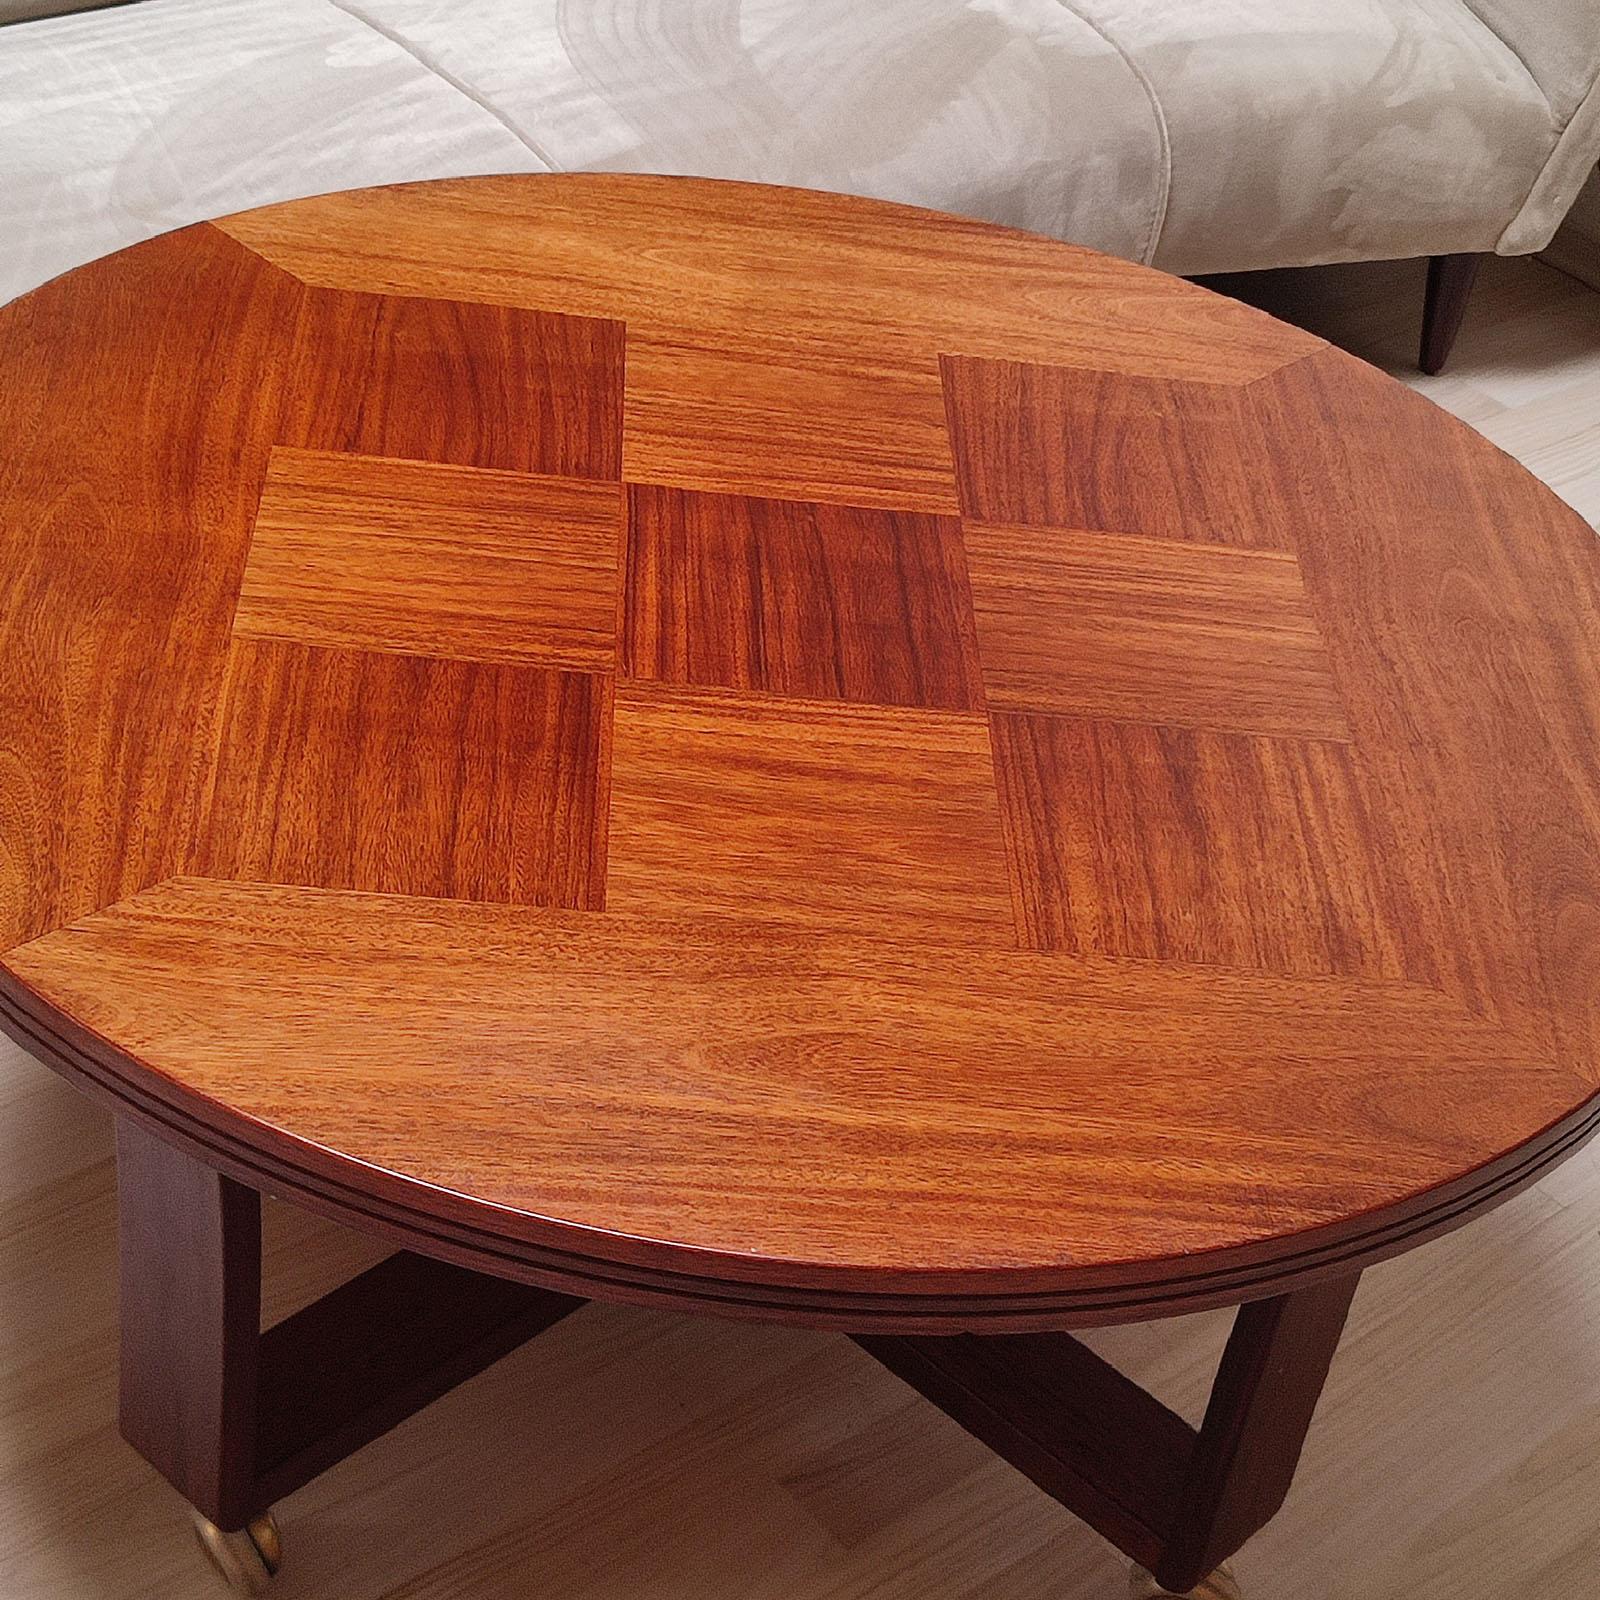 Mid-Century Modern Round Coffee Sofa Table on Castors, Sweden 1970s For Sale 3